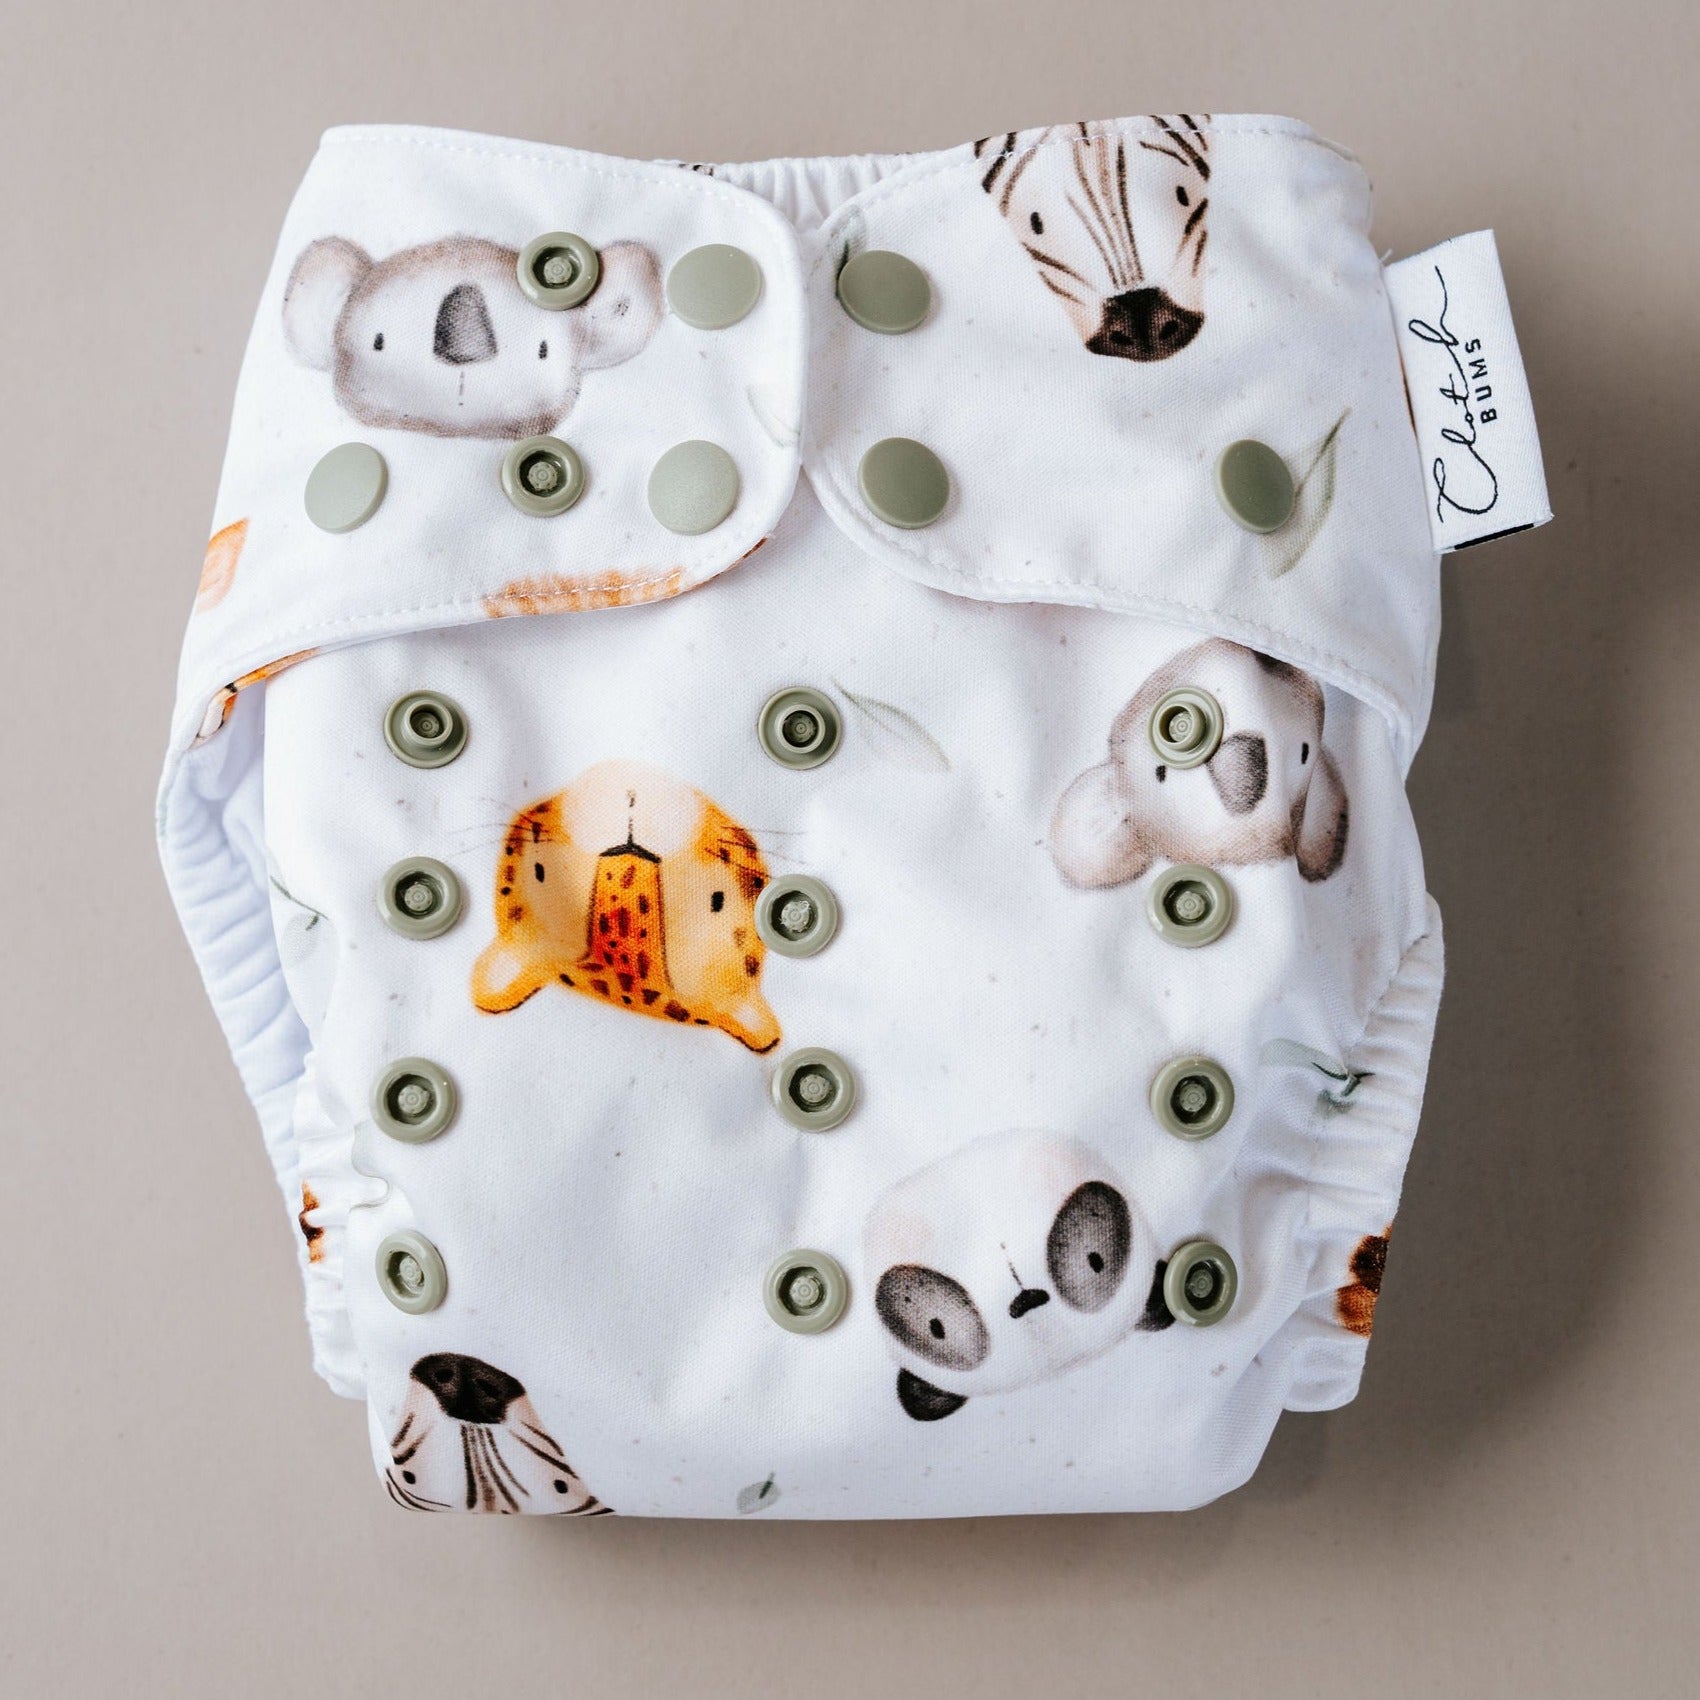 PIXIE One Size Fits Most Cloth Nappy - Peek A Zoo